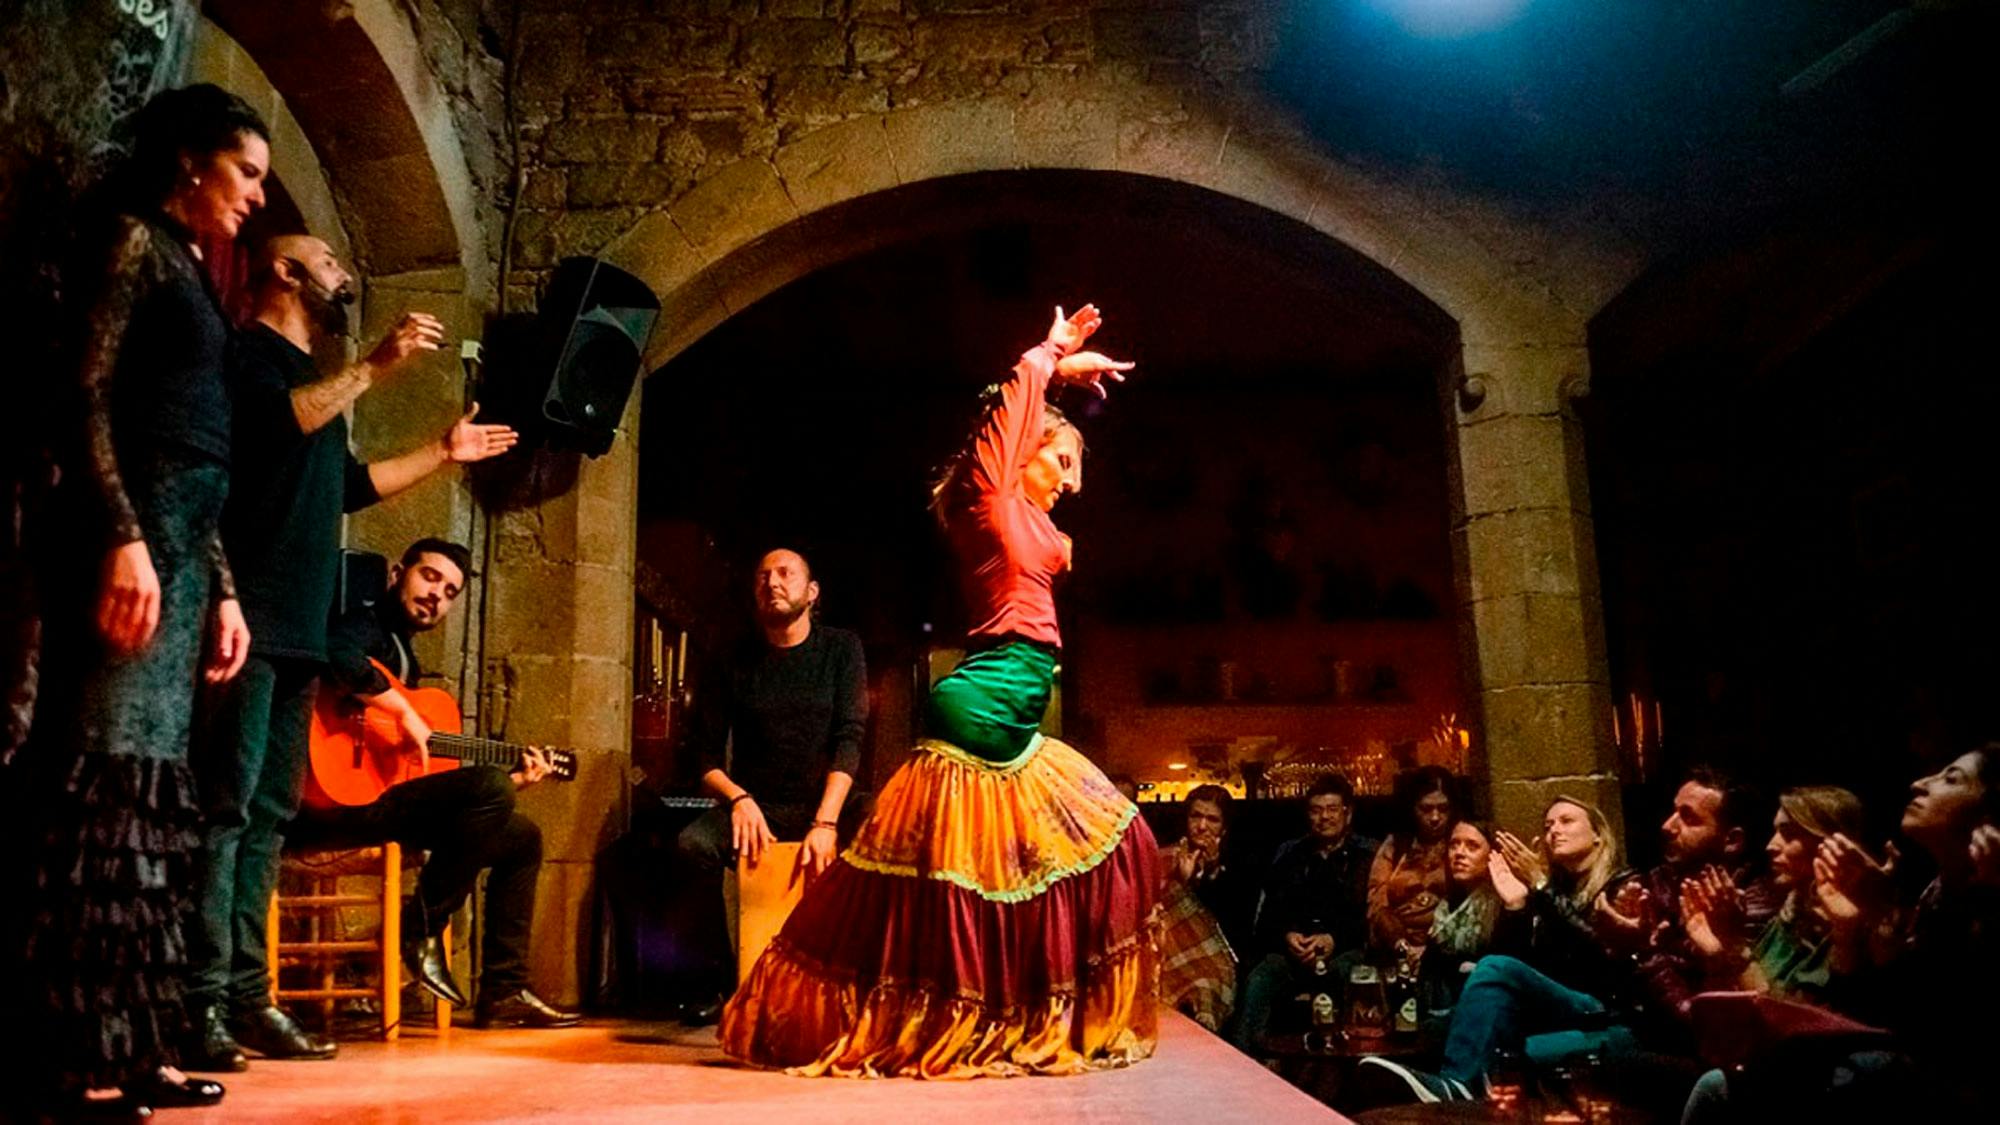 Barcelona old town tour with flamenco show and tapas Musement